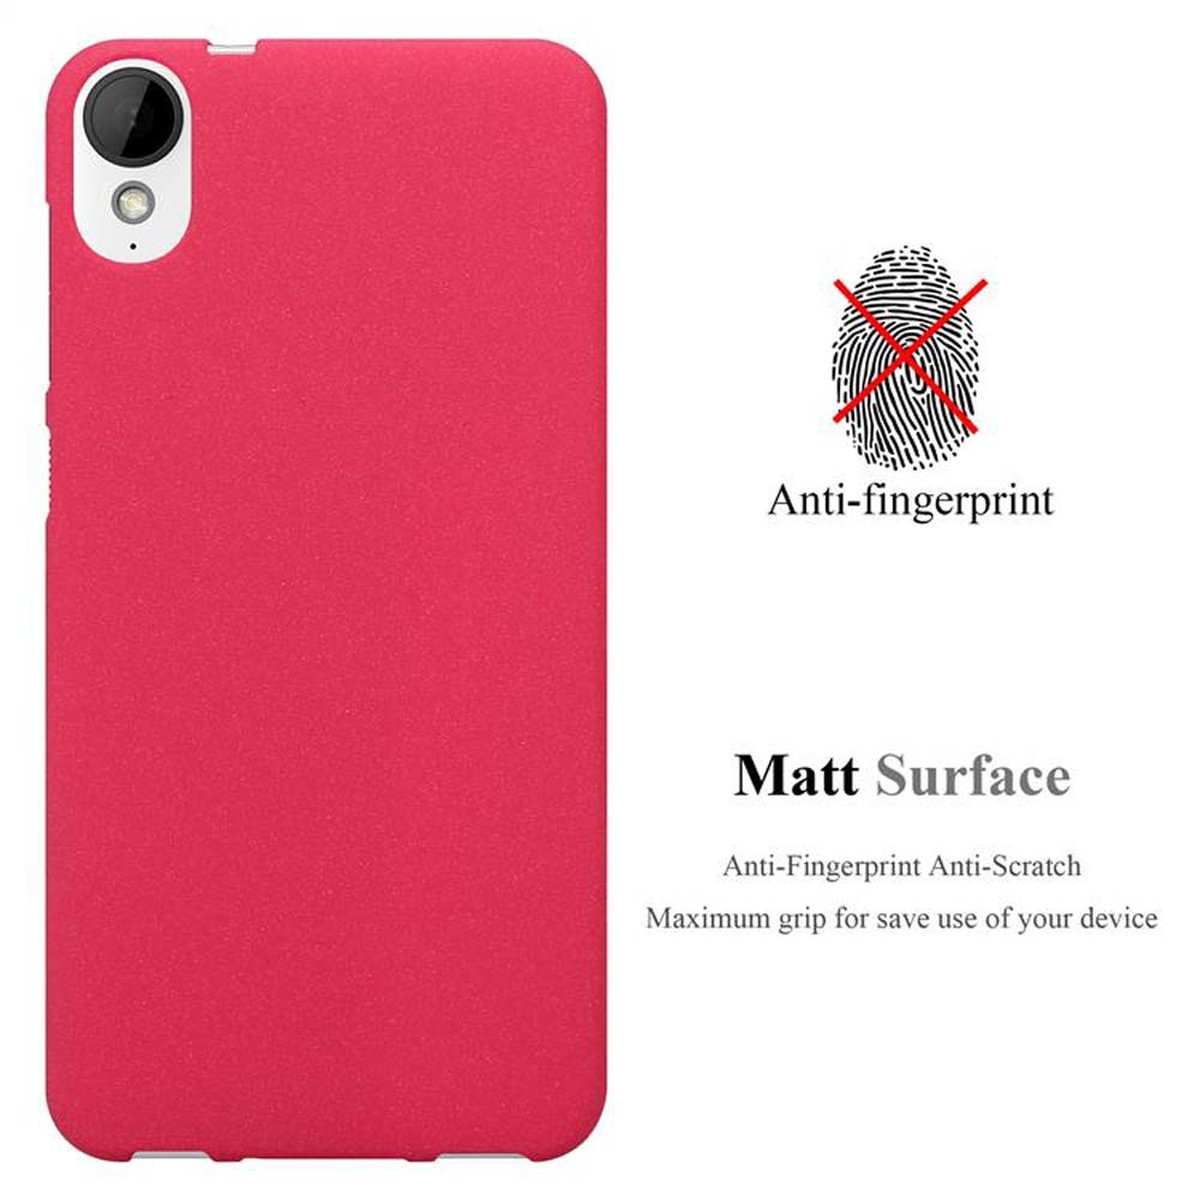 ROT TPU Backcover, Desire / CADORABO HTC, LIFESTYLE FROST 10 Frosted 825, Schutzhülle, Desire